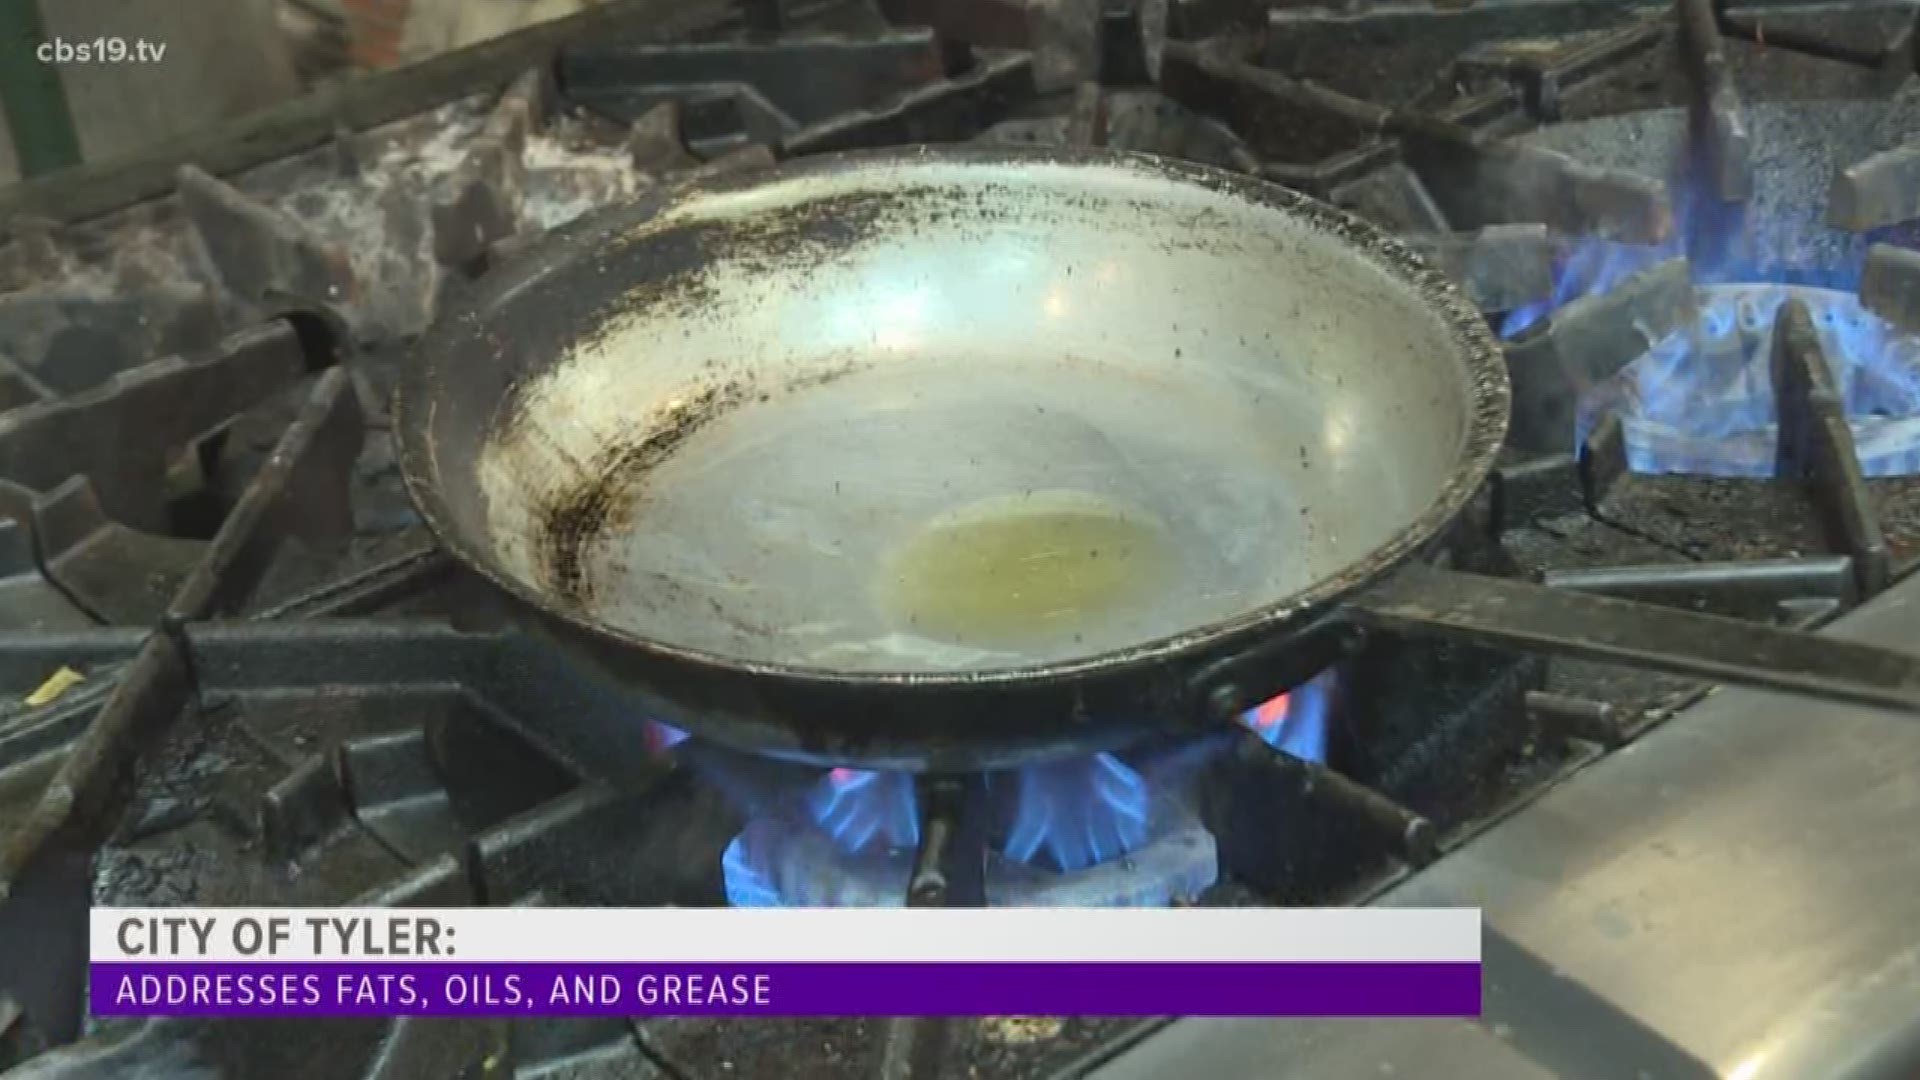 The Tyler City Council approved the FOG ordinance, which will affect how restaurants dispose of fats, oils, and grease.